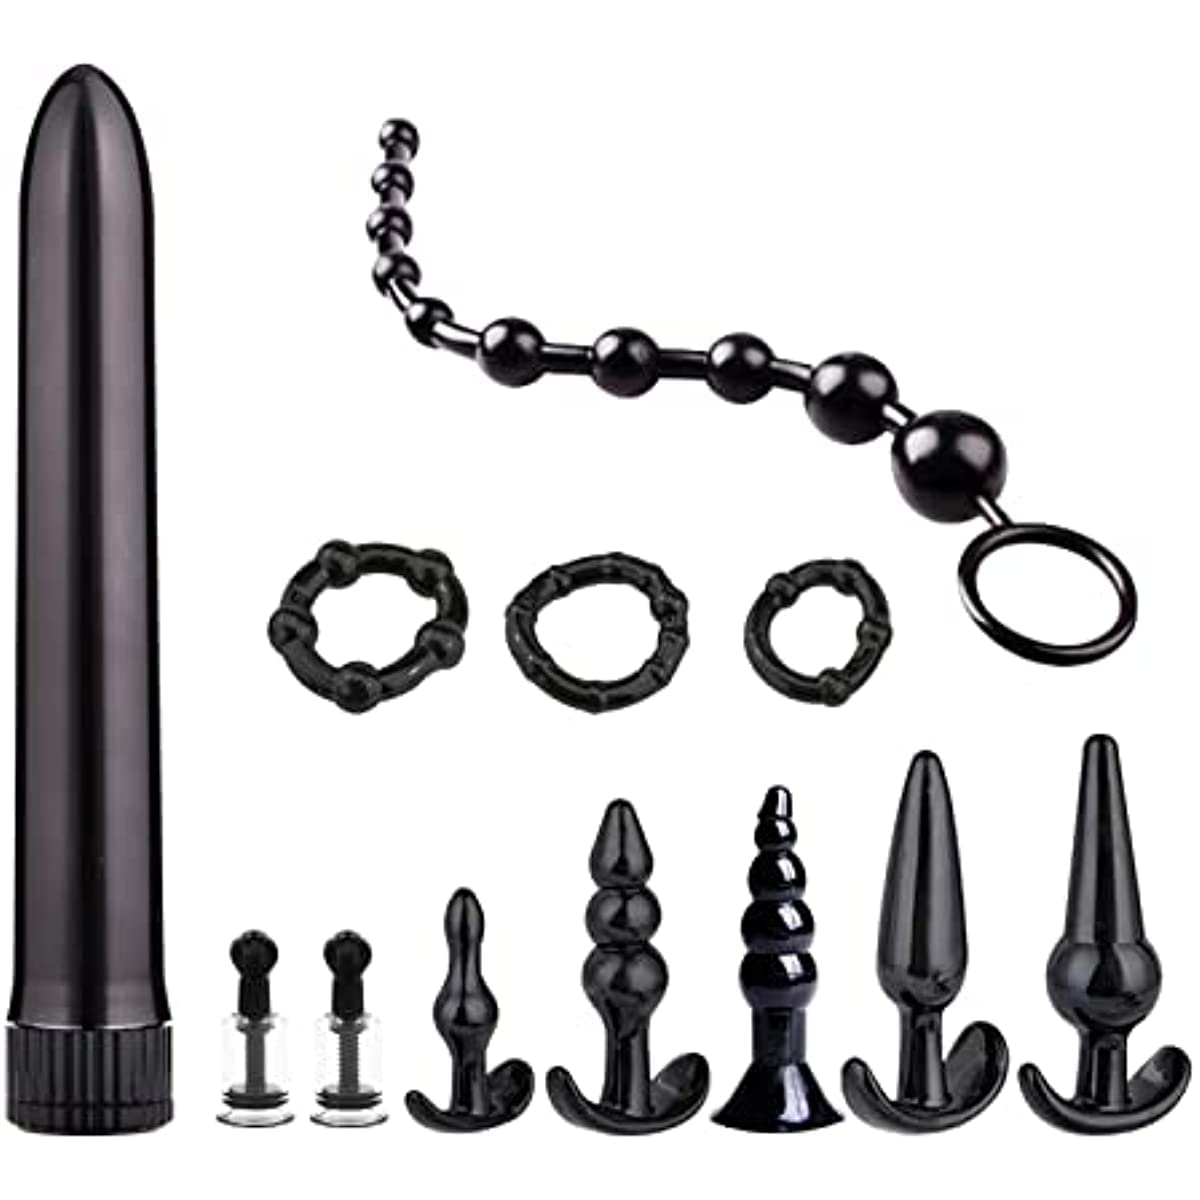 WJE Sex Toys 12 Pieces, Plug 7 Set, 3 Rings and 1 Pair of Nipple Suction BDSM Bondage Set, Toy, Prostate Massage, Breast Stimulators, Butt Plug, Sex Toy for Men and Women